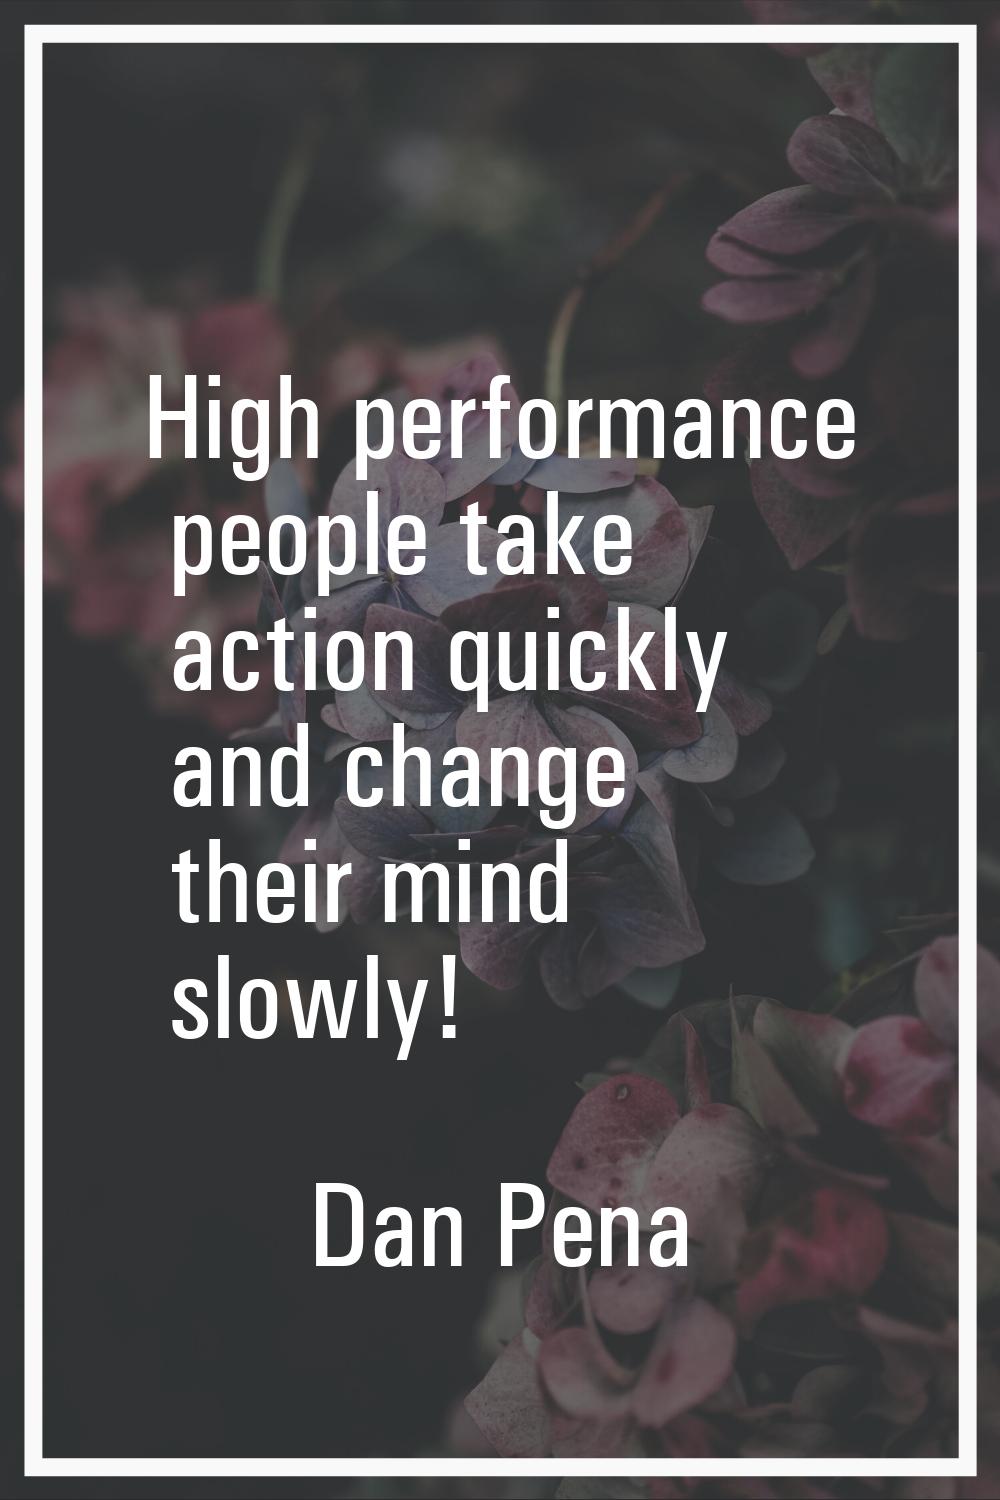 High performance people take action quickly and change their mind slowly!